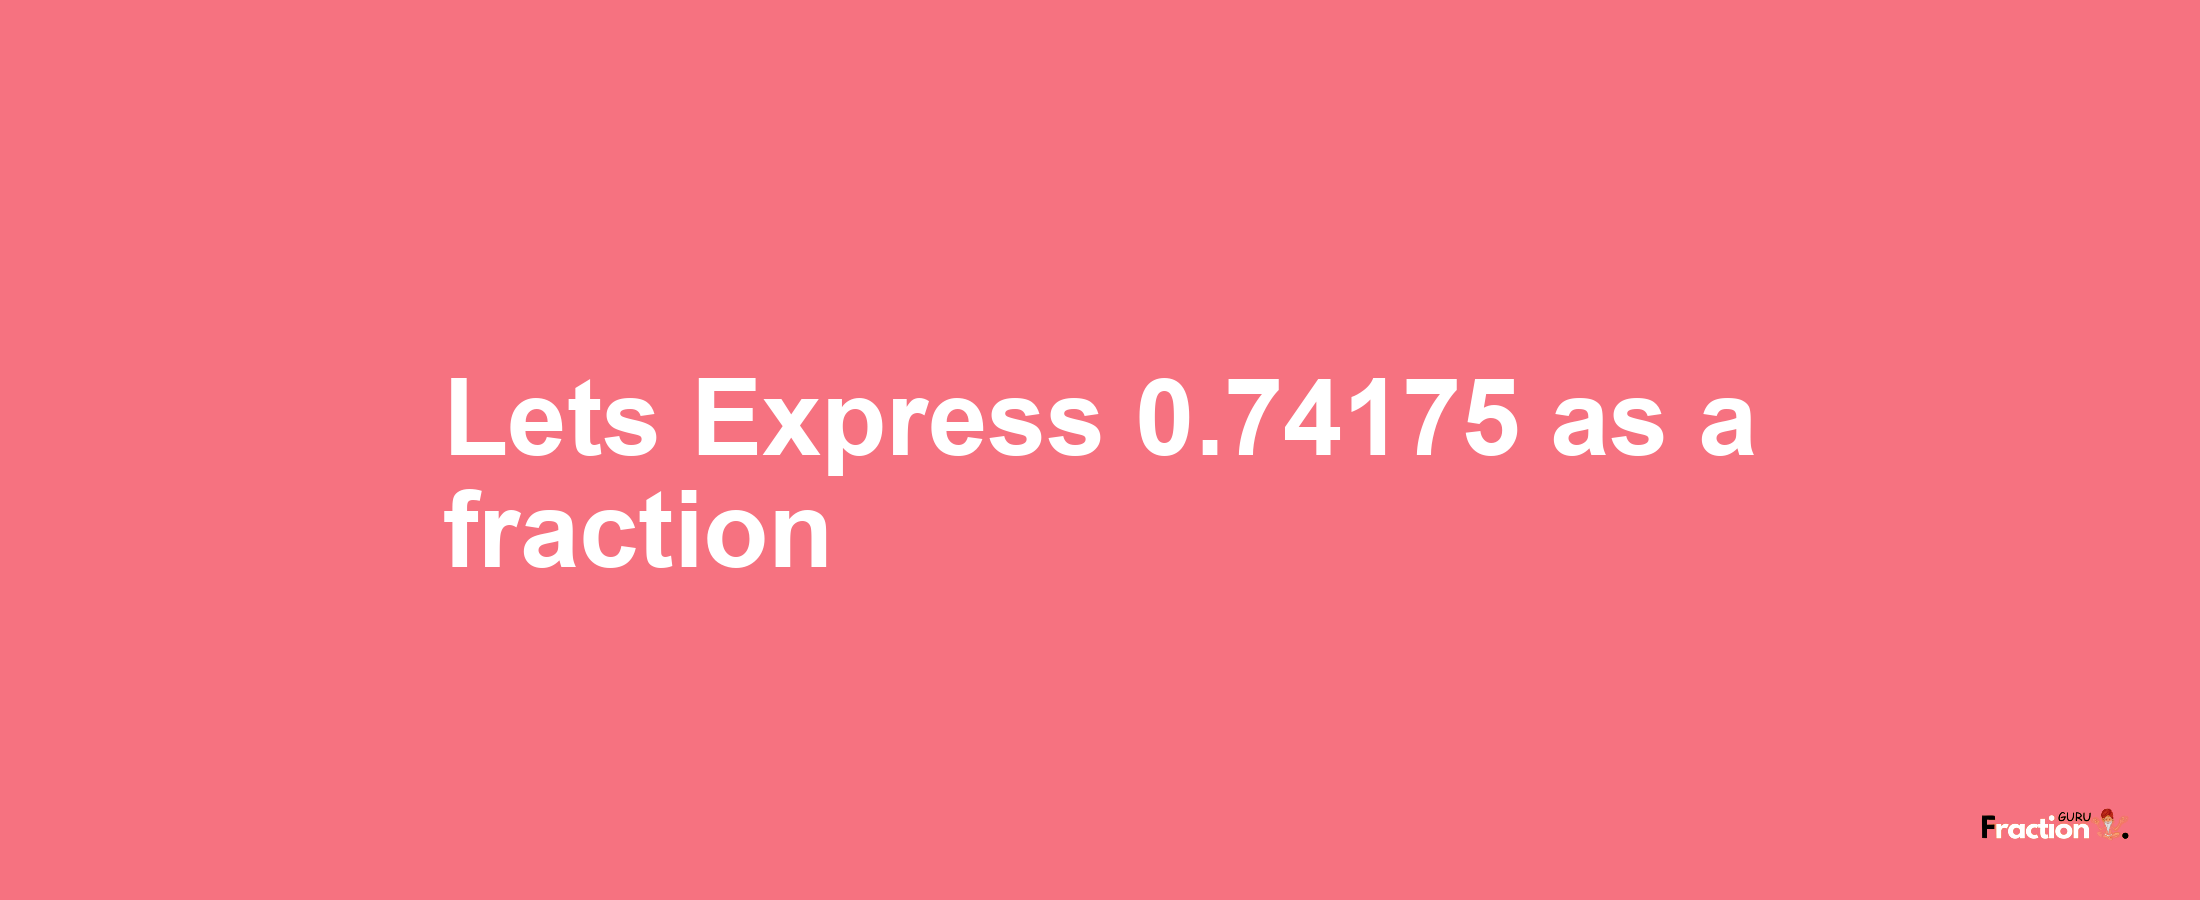 Lets Express 0.74175 as afraction